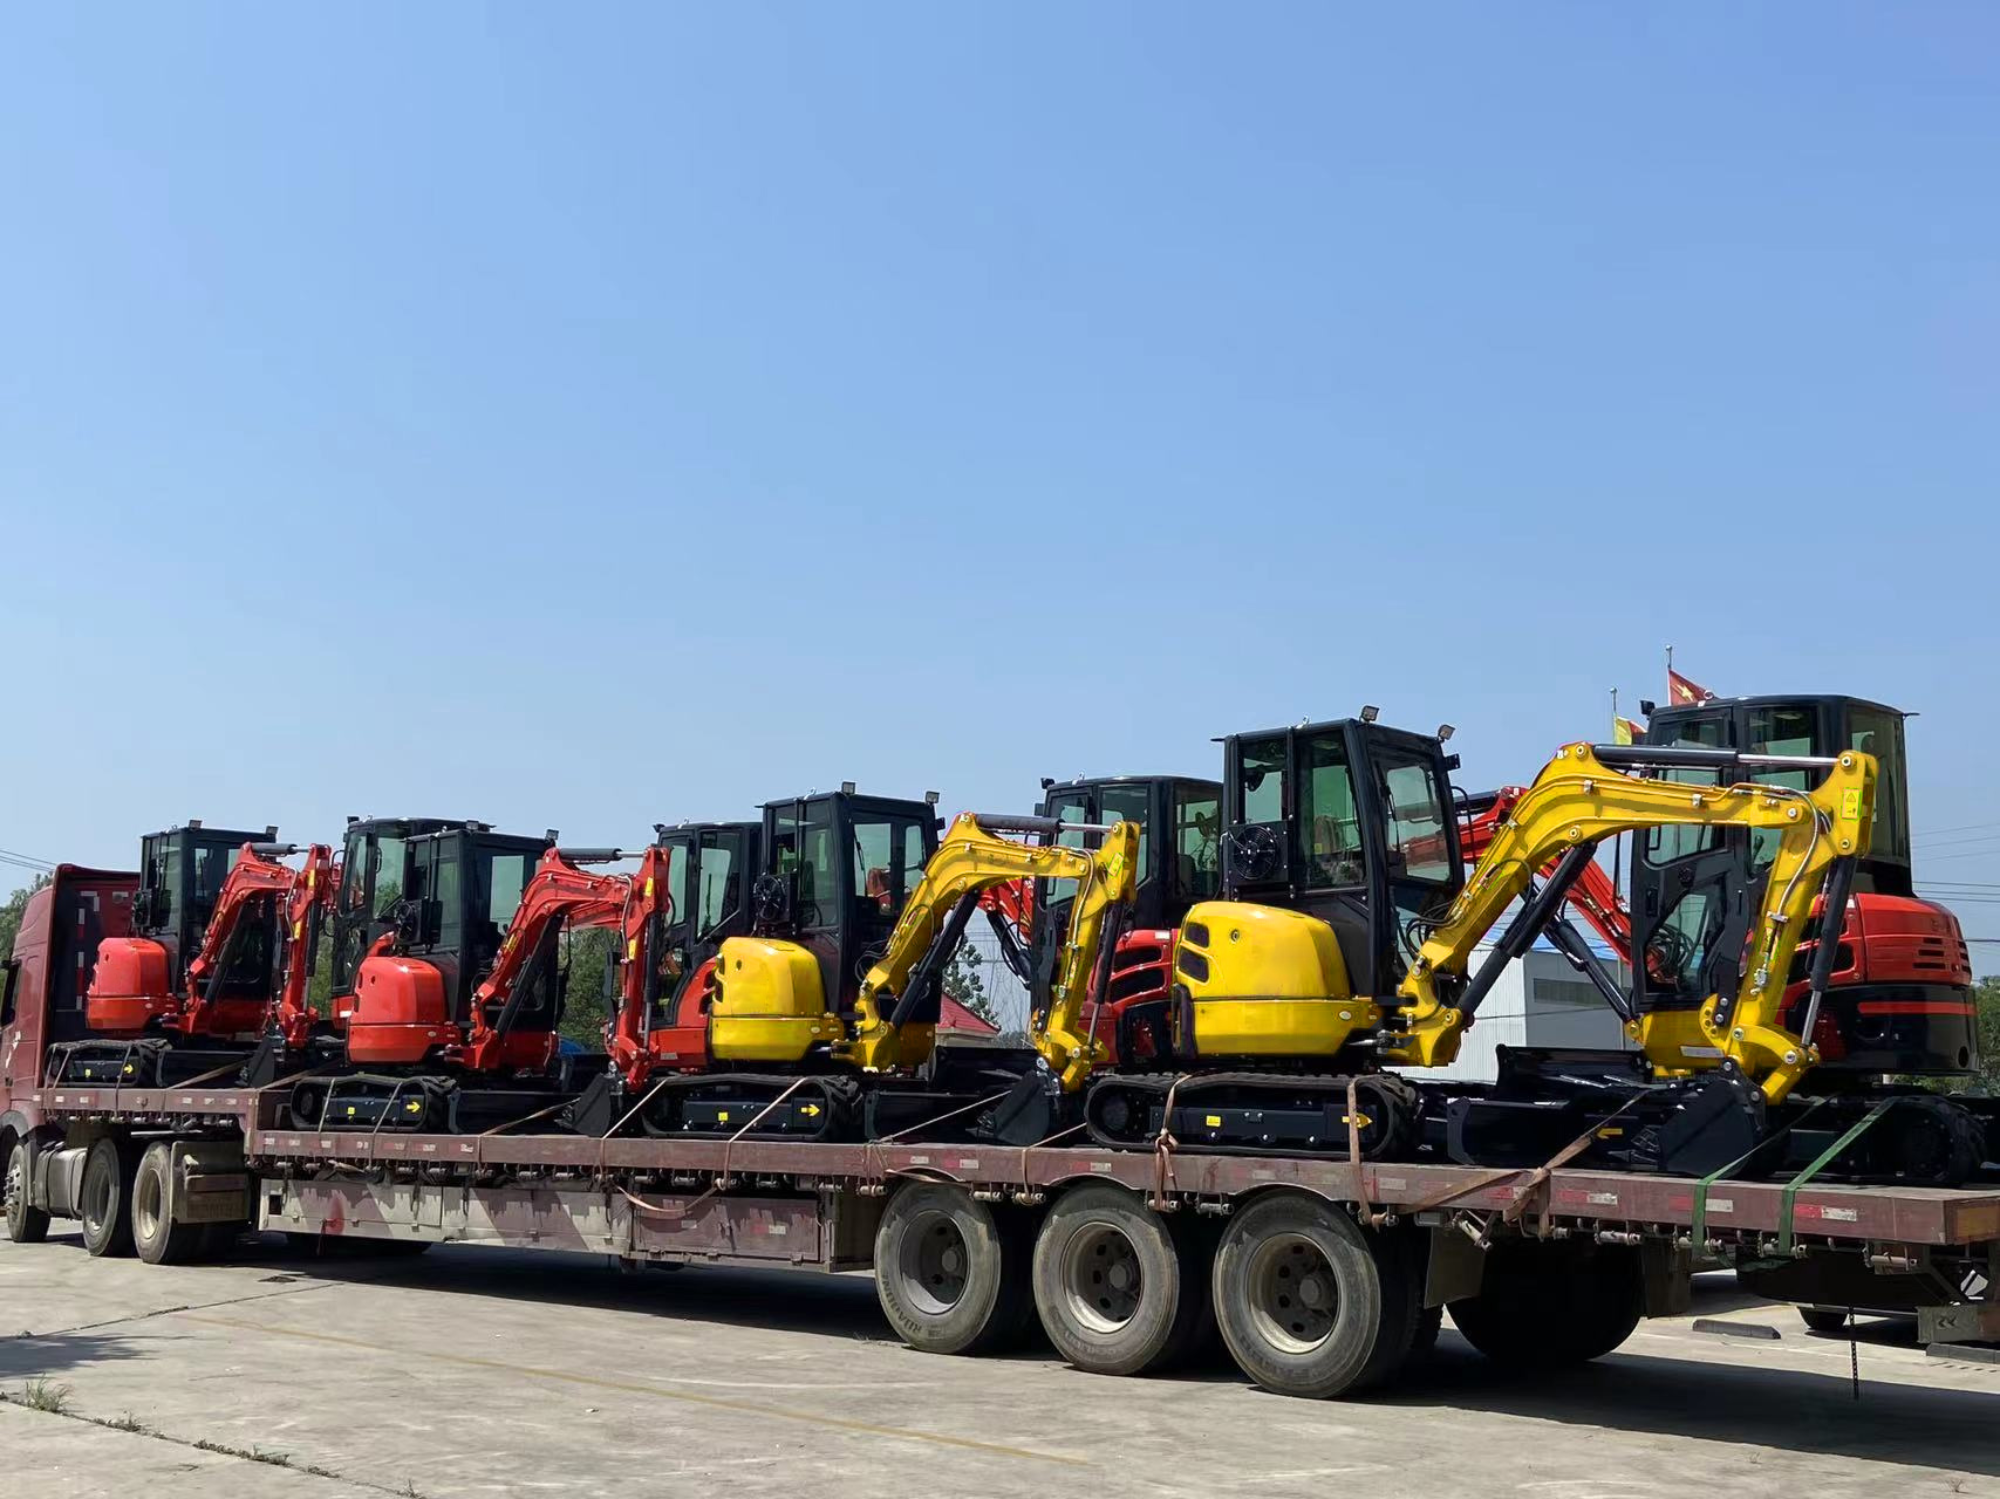 8 sets excavators shipped to the United States